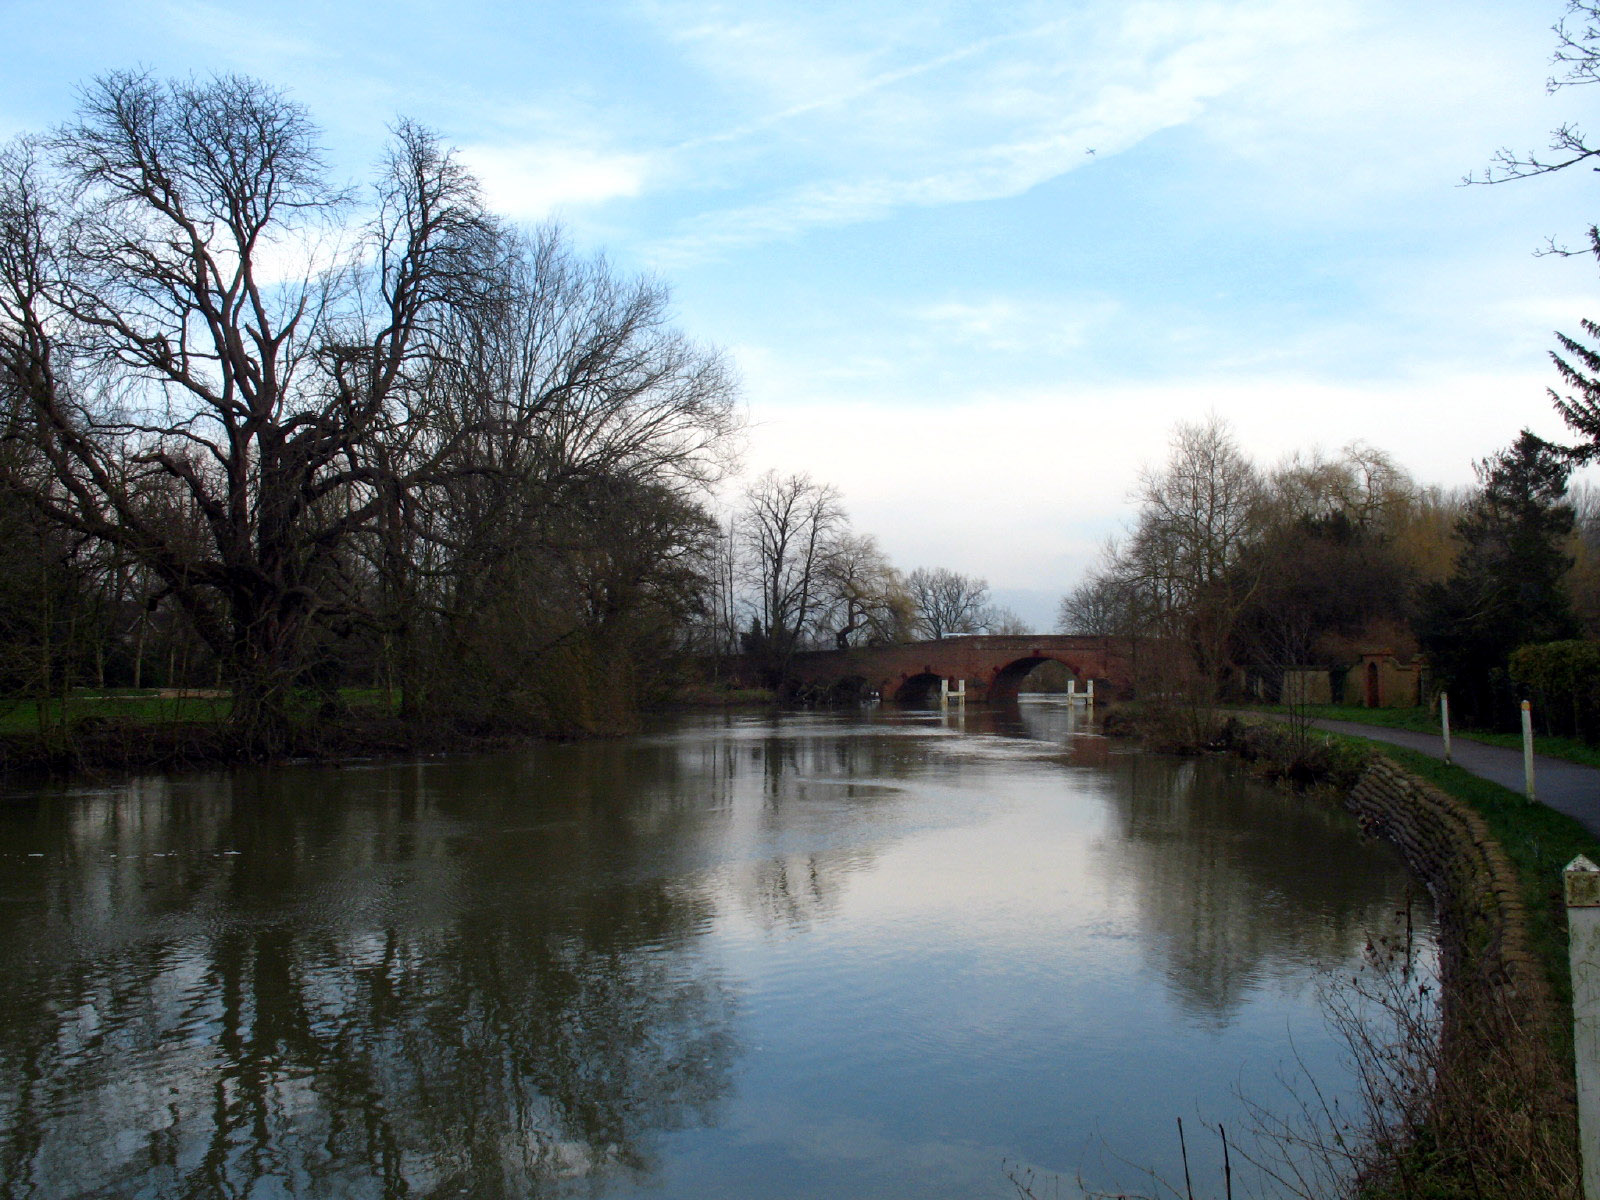 Thames Path - Reading to Henley-on-Thames